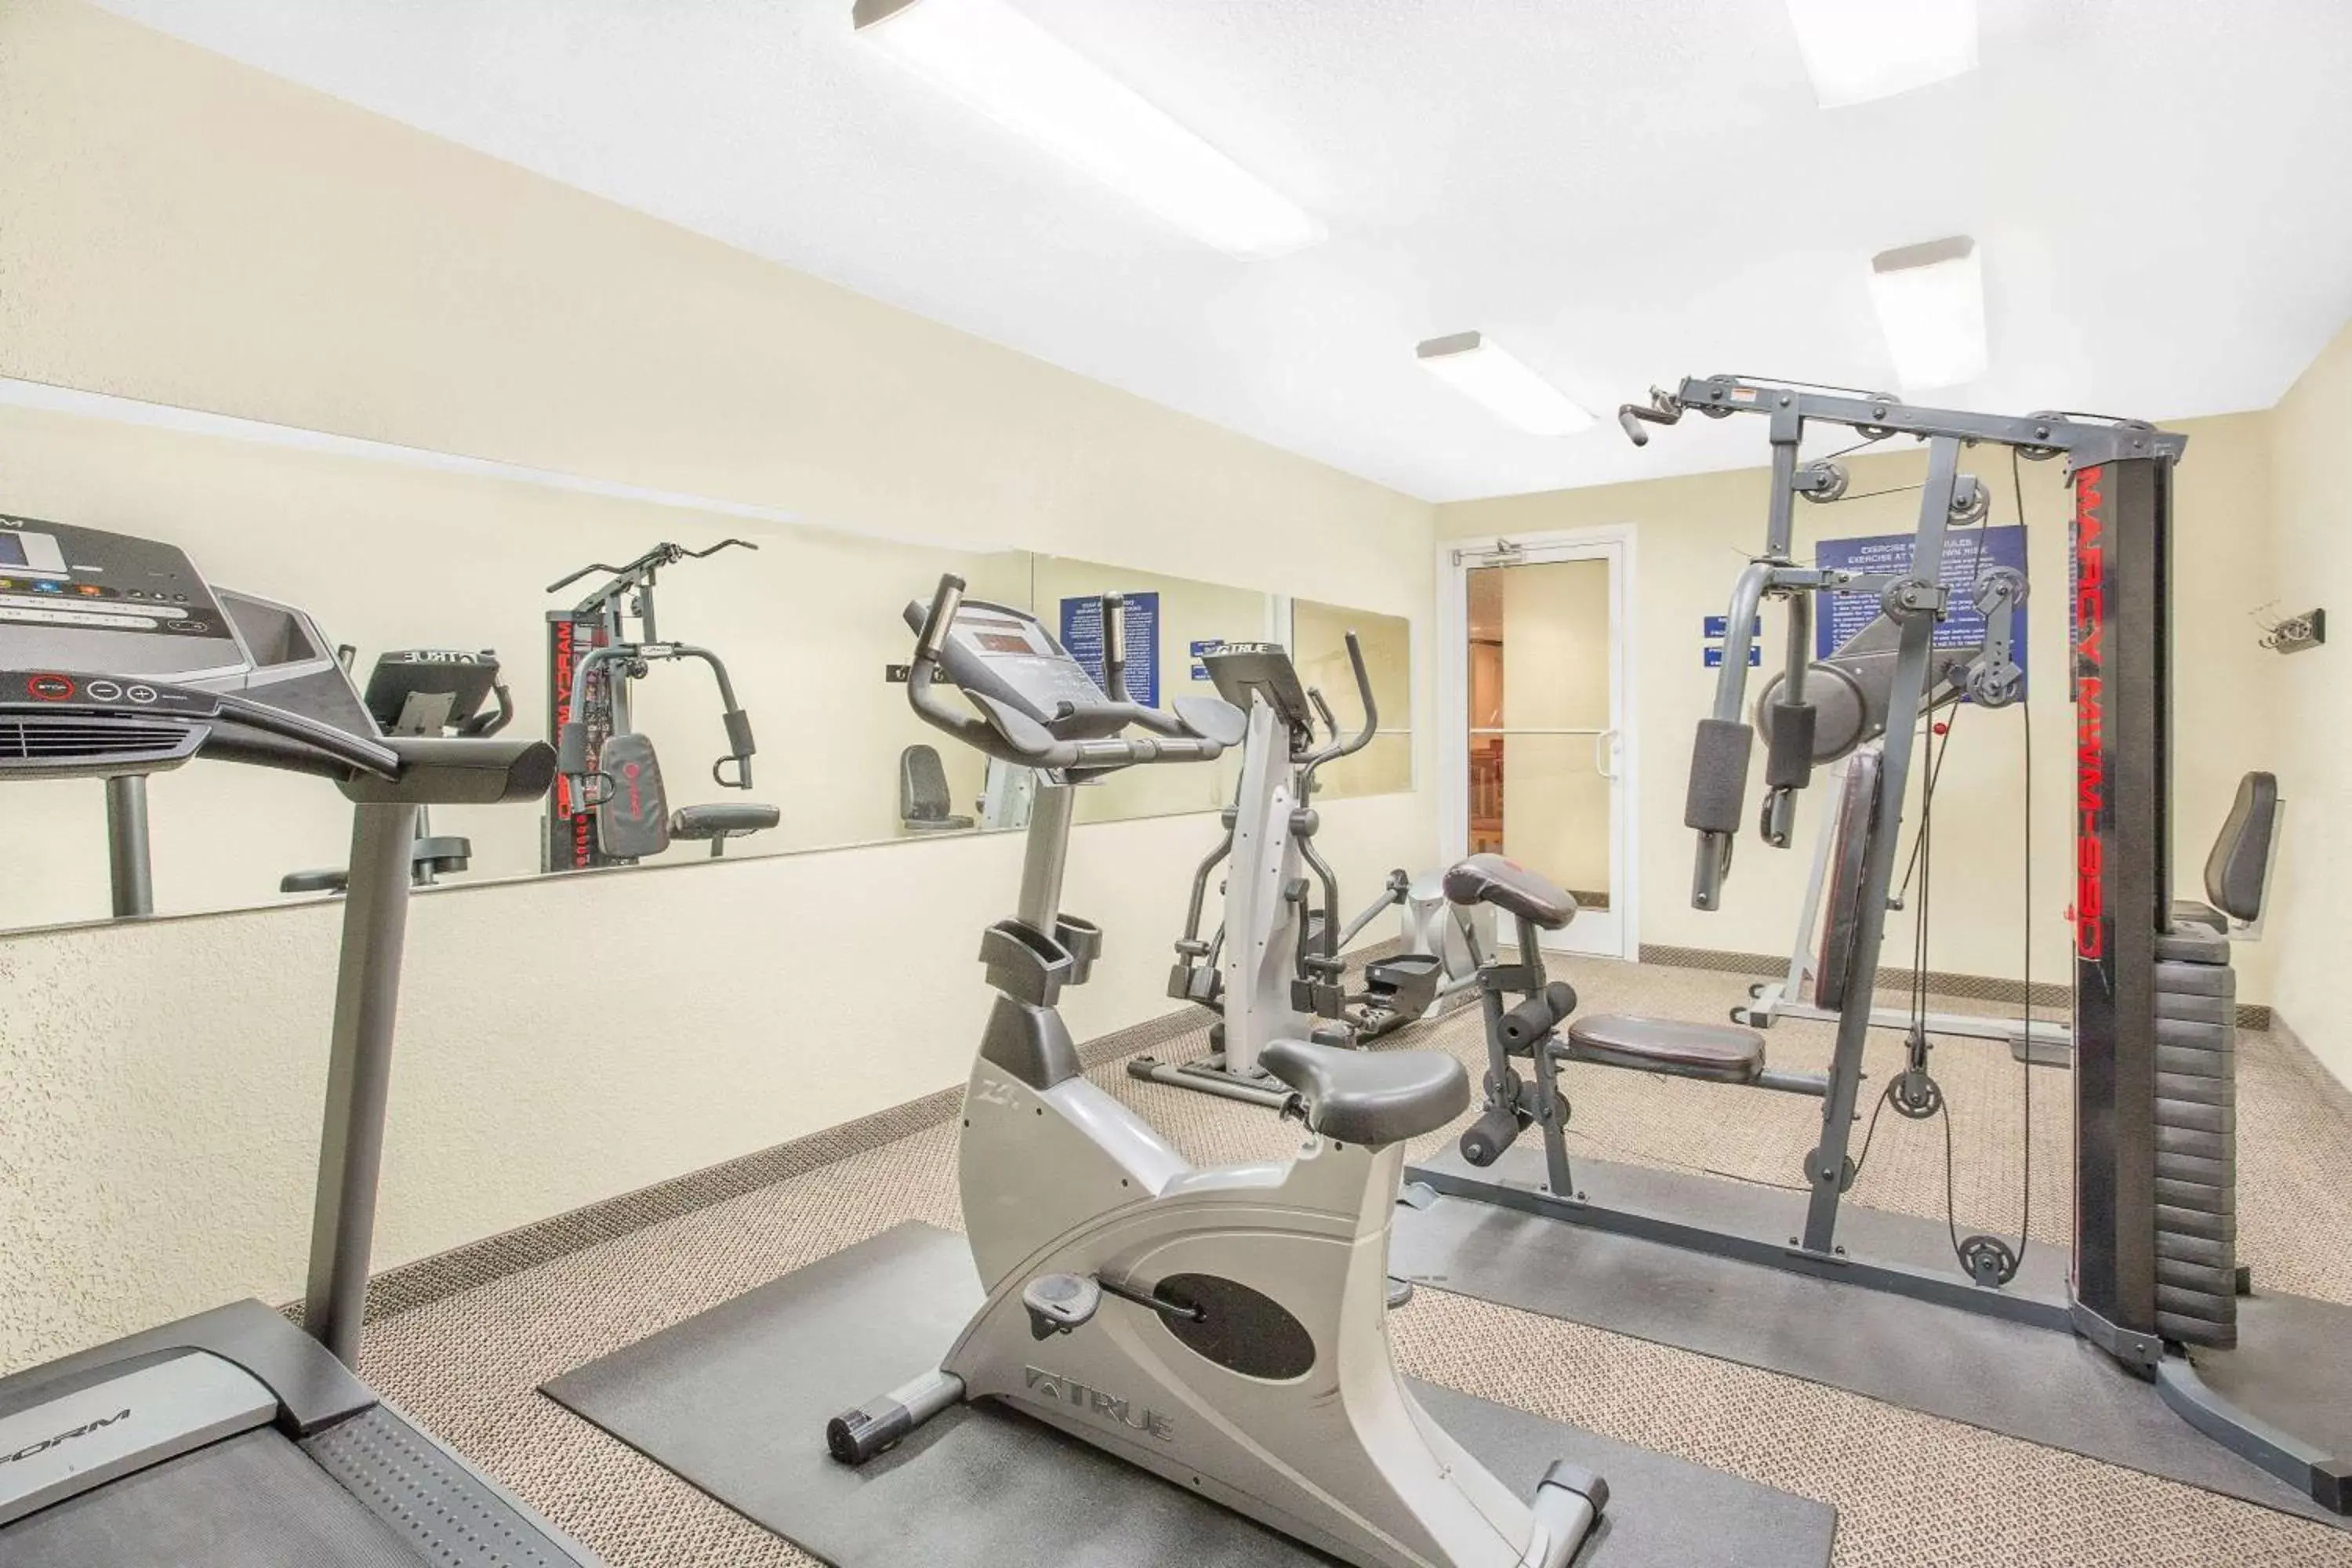 Fitness centre/facilities, Fitness Center/Facilities in Microtel Inn & Suites Beckley East